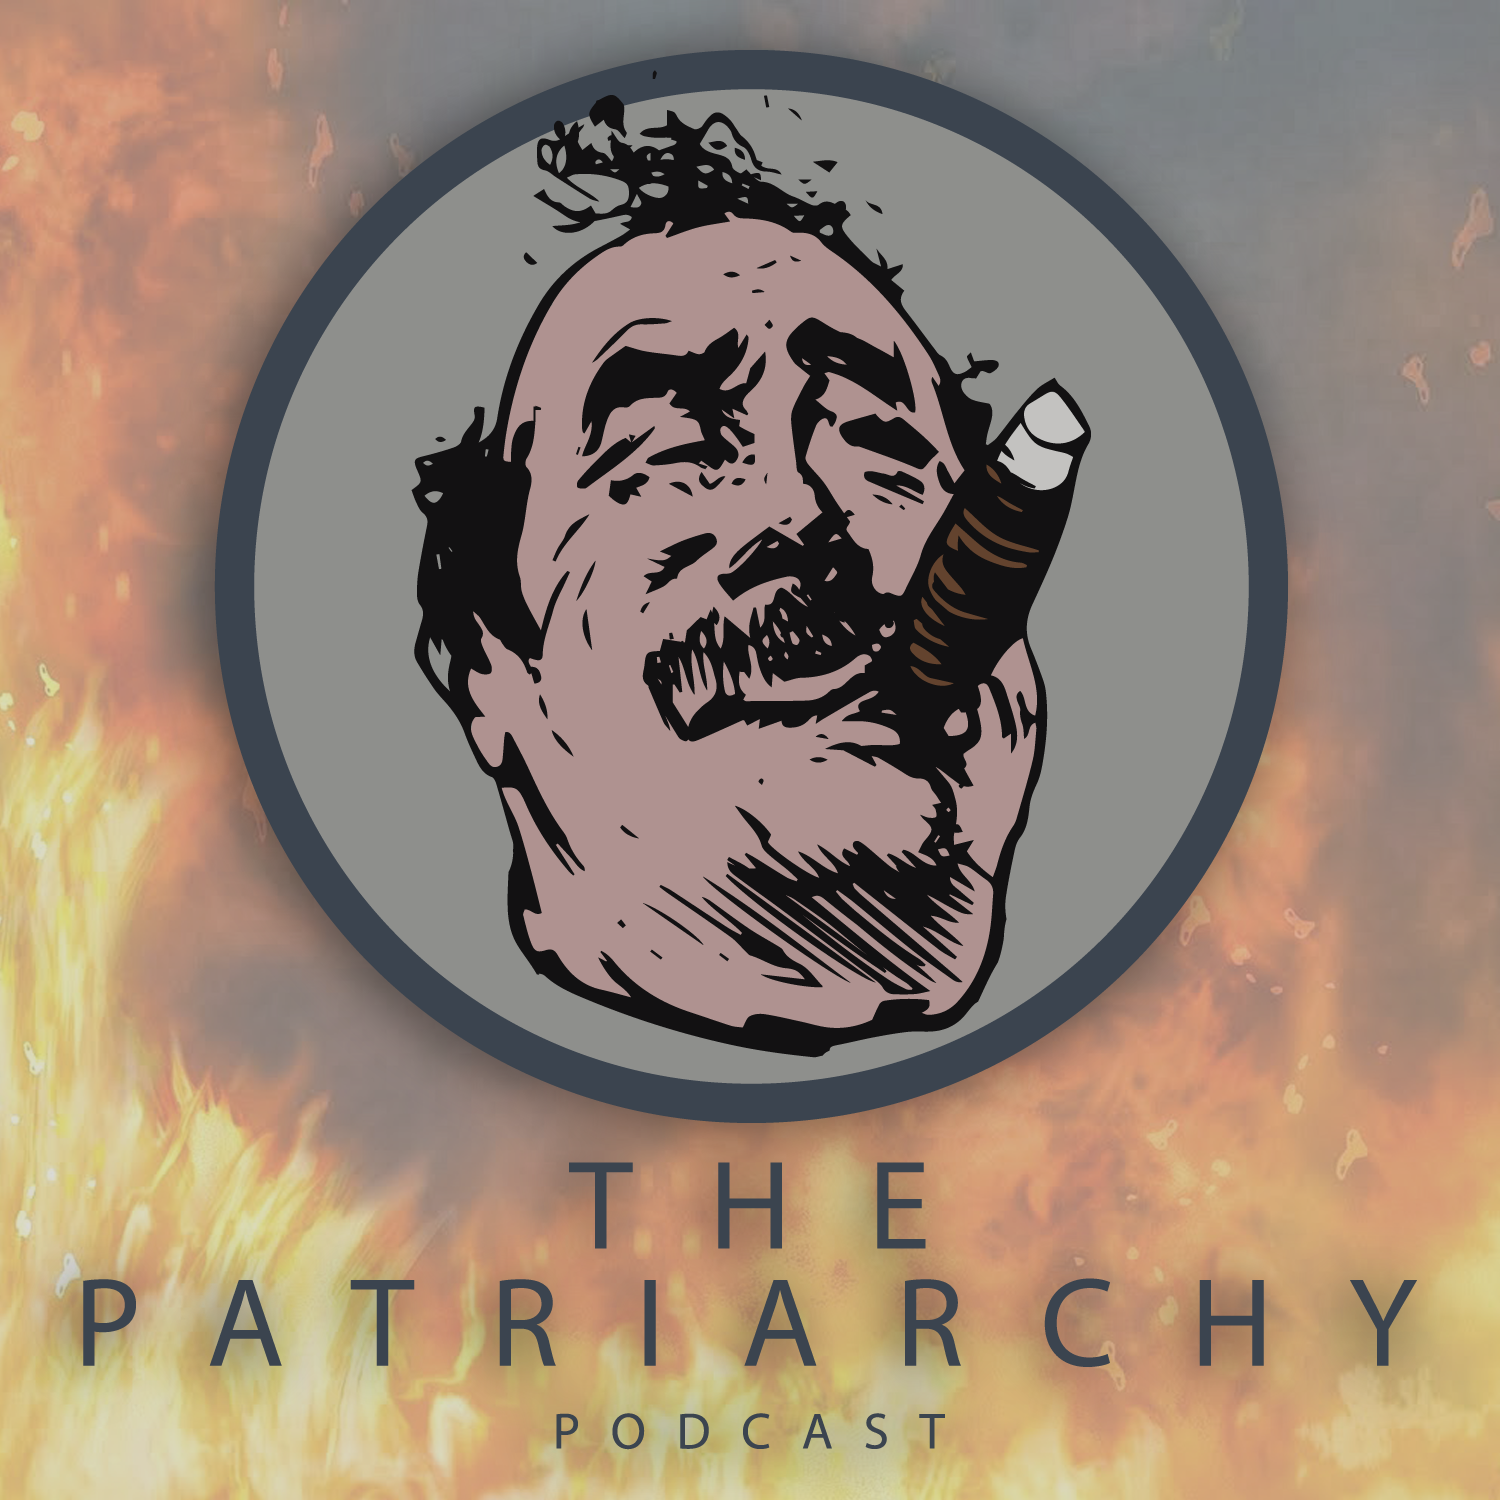 The Patriarchy Podcast: When Enough Is Enough (Ep 40)